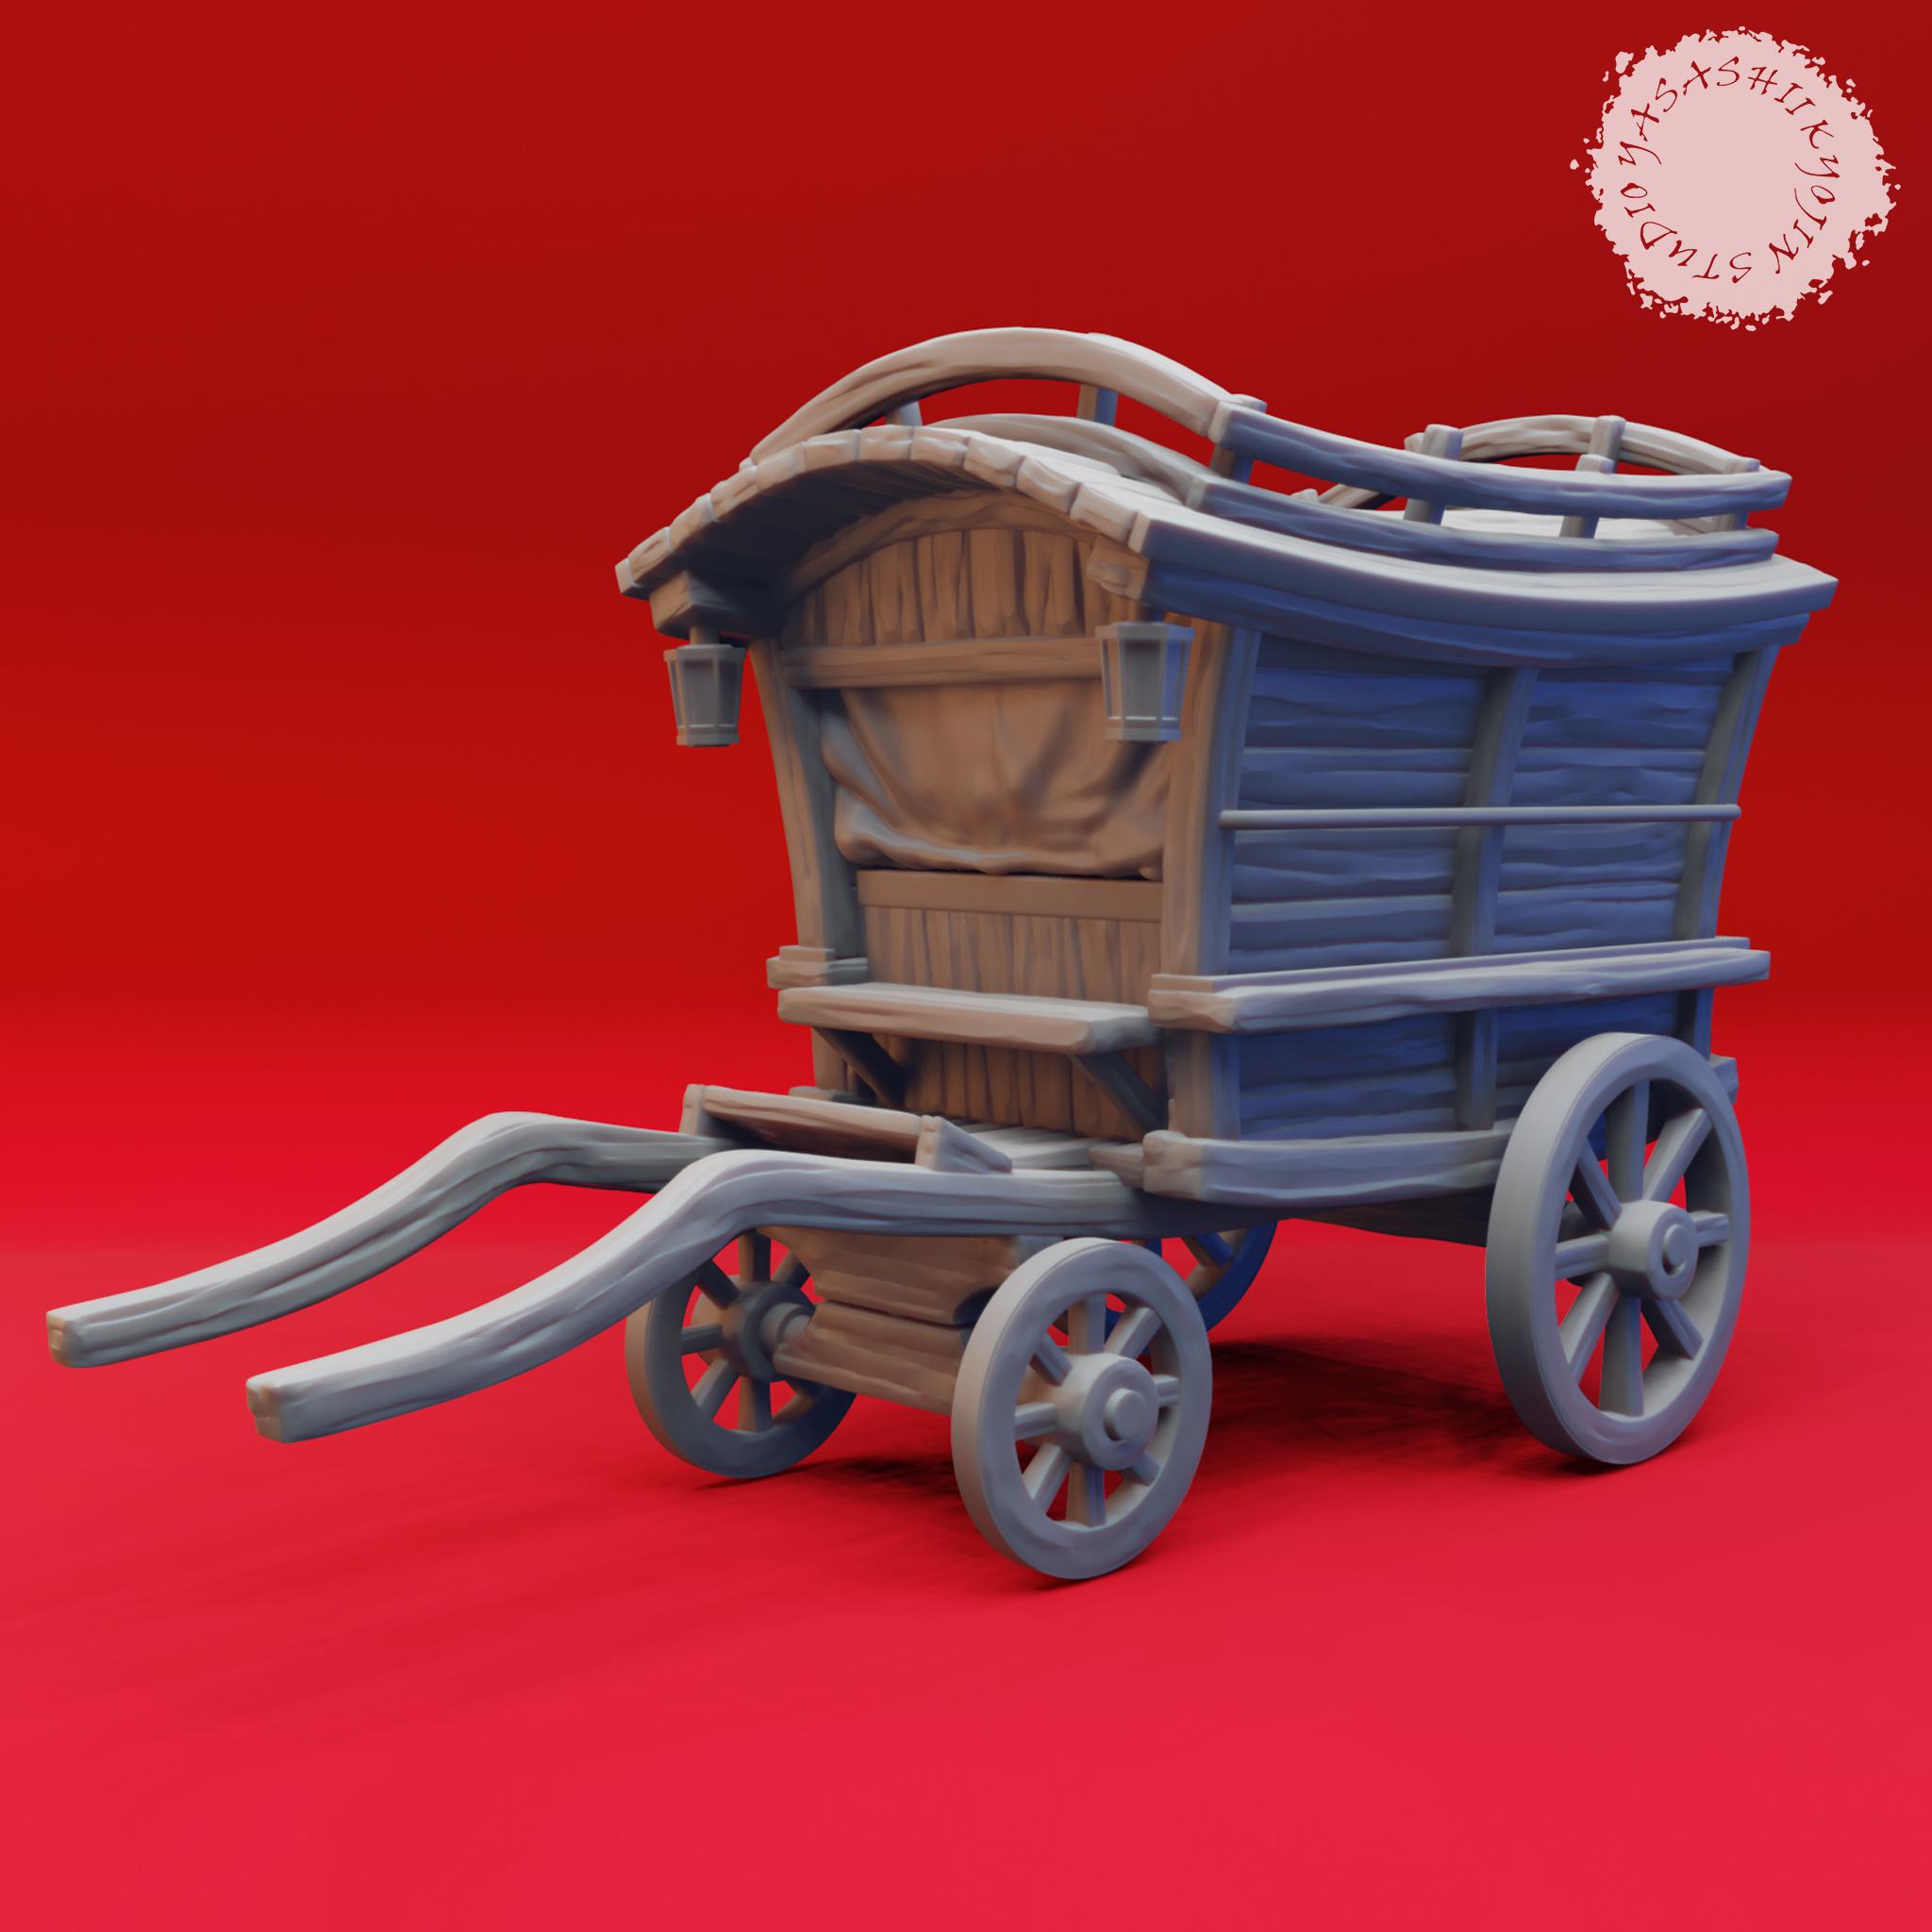 Mimic Wagon - Book of Beasts - Tabletop Miniatures (Pre-Supported) 3d model